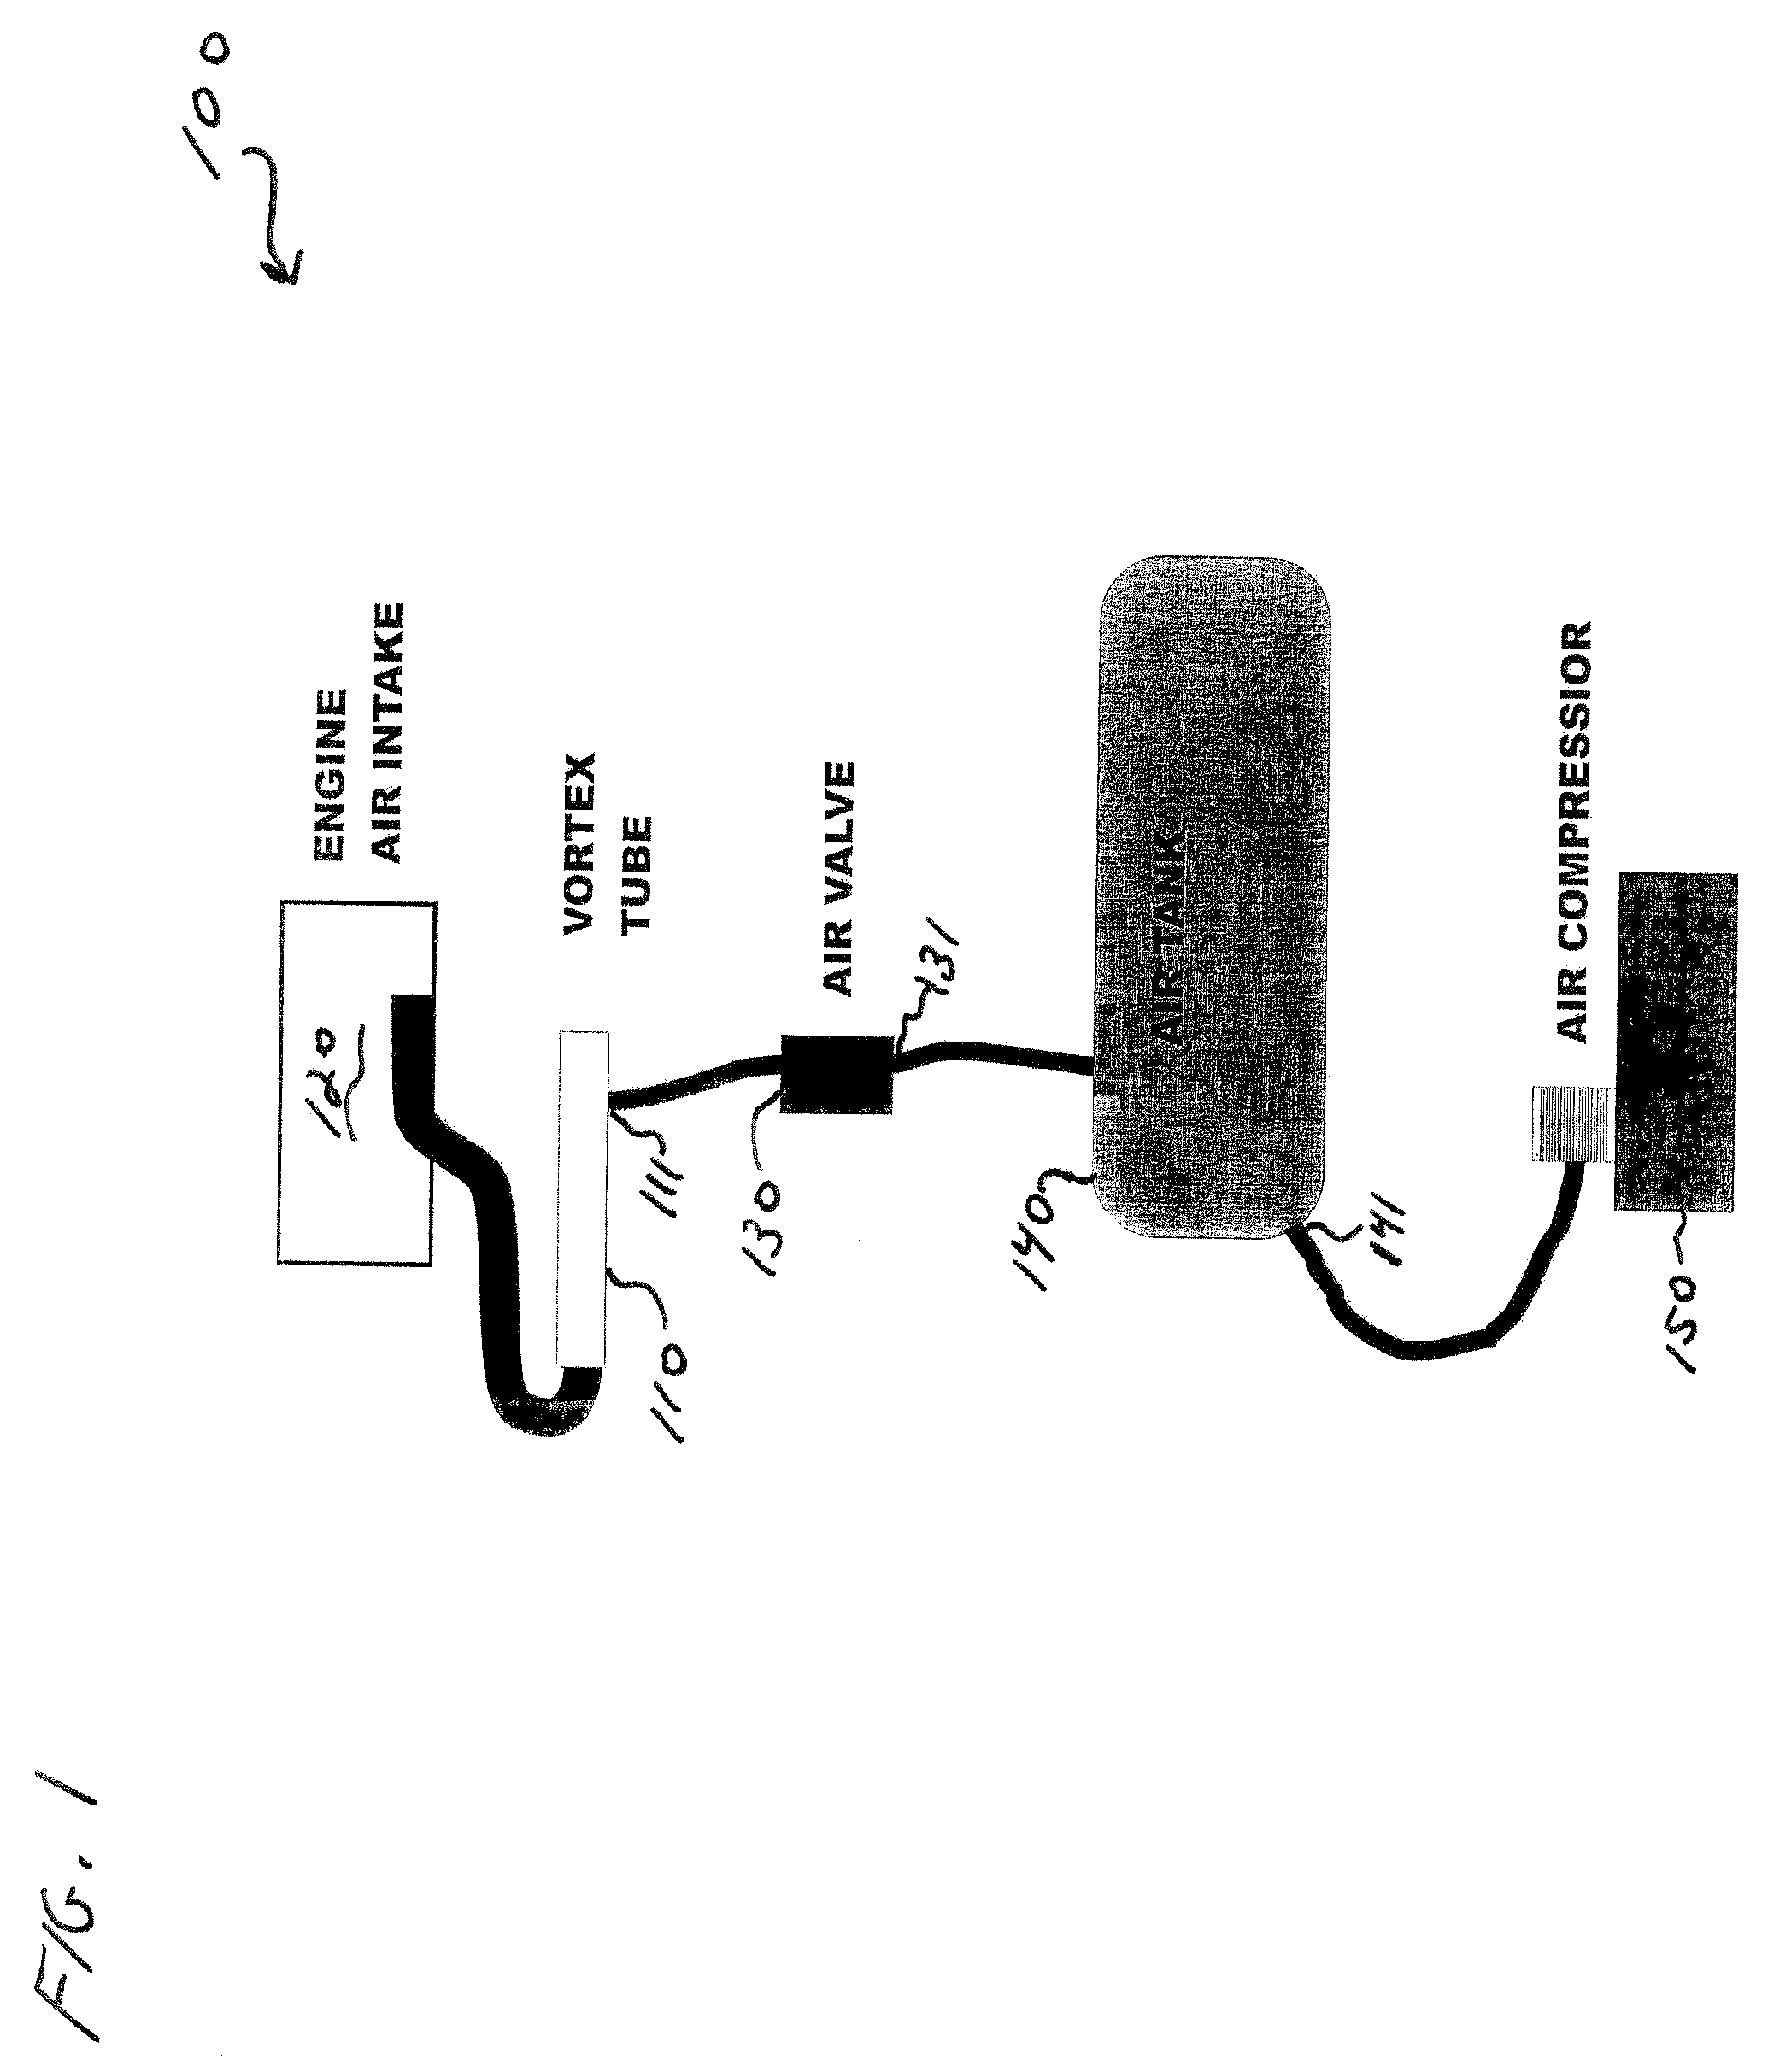 System and method for cooling air intake